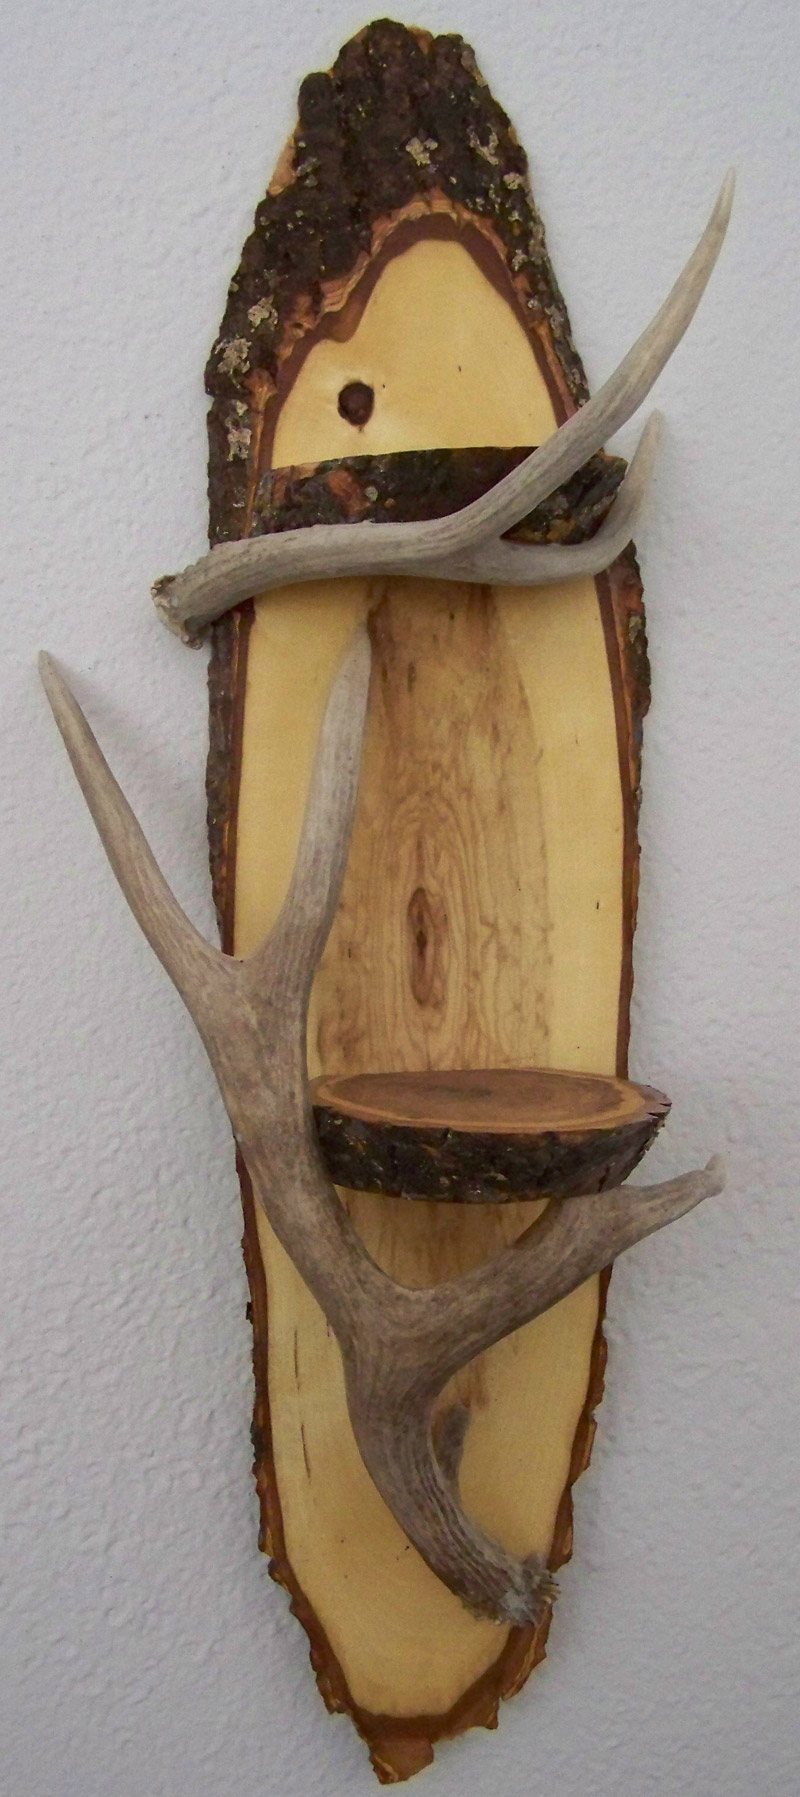  Antler Projects for Small Space